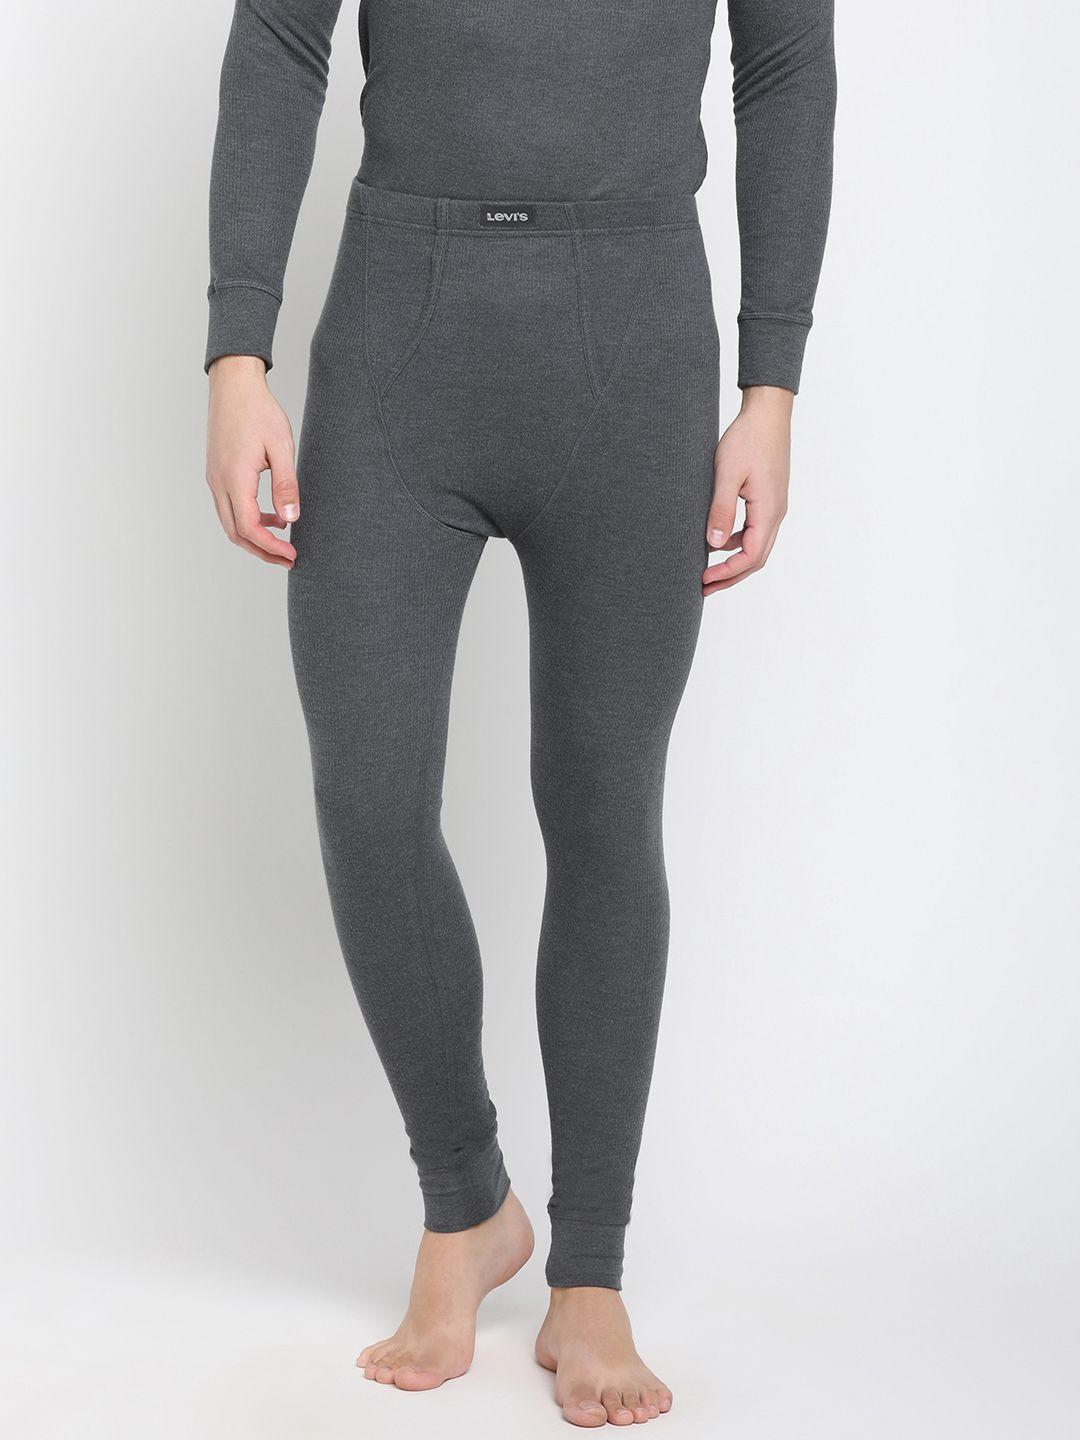 levis-men-charcoal-grey-solid--thermal-bottoms